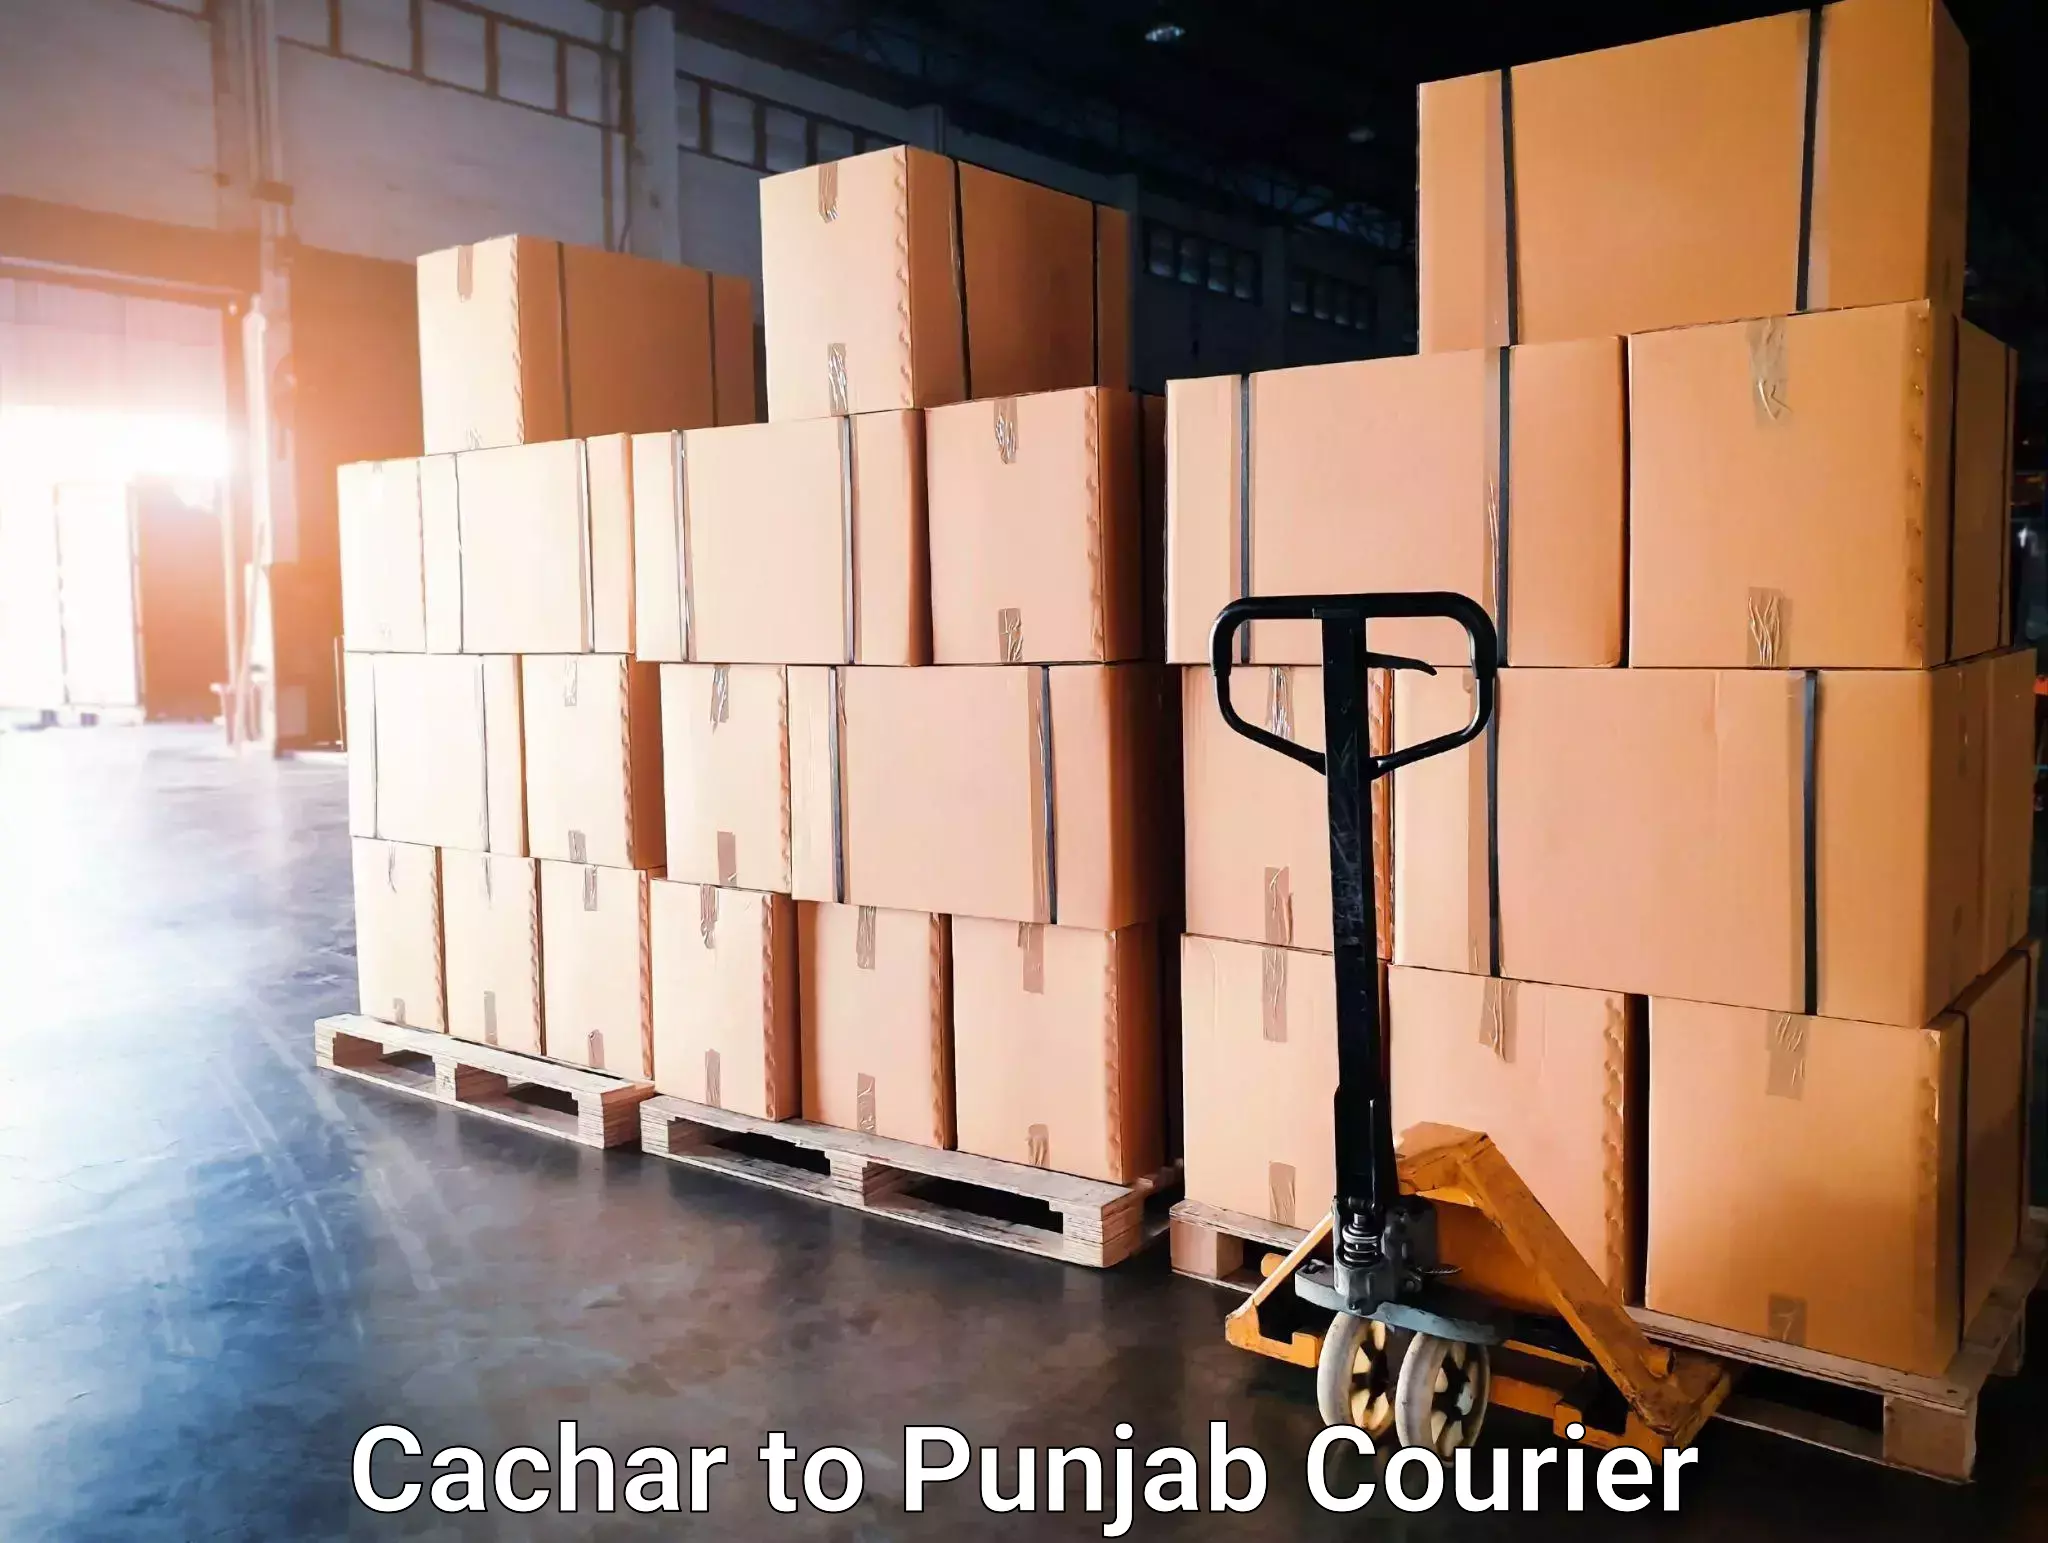 Track and trace shipping Cachar to Mohali